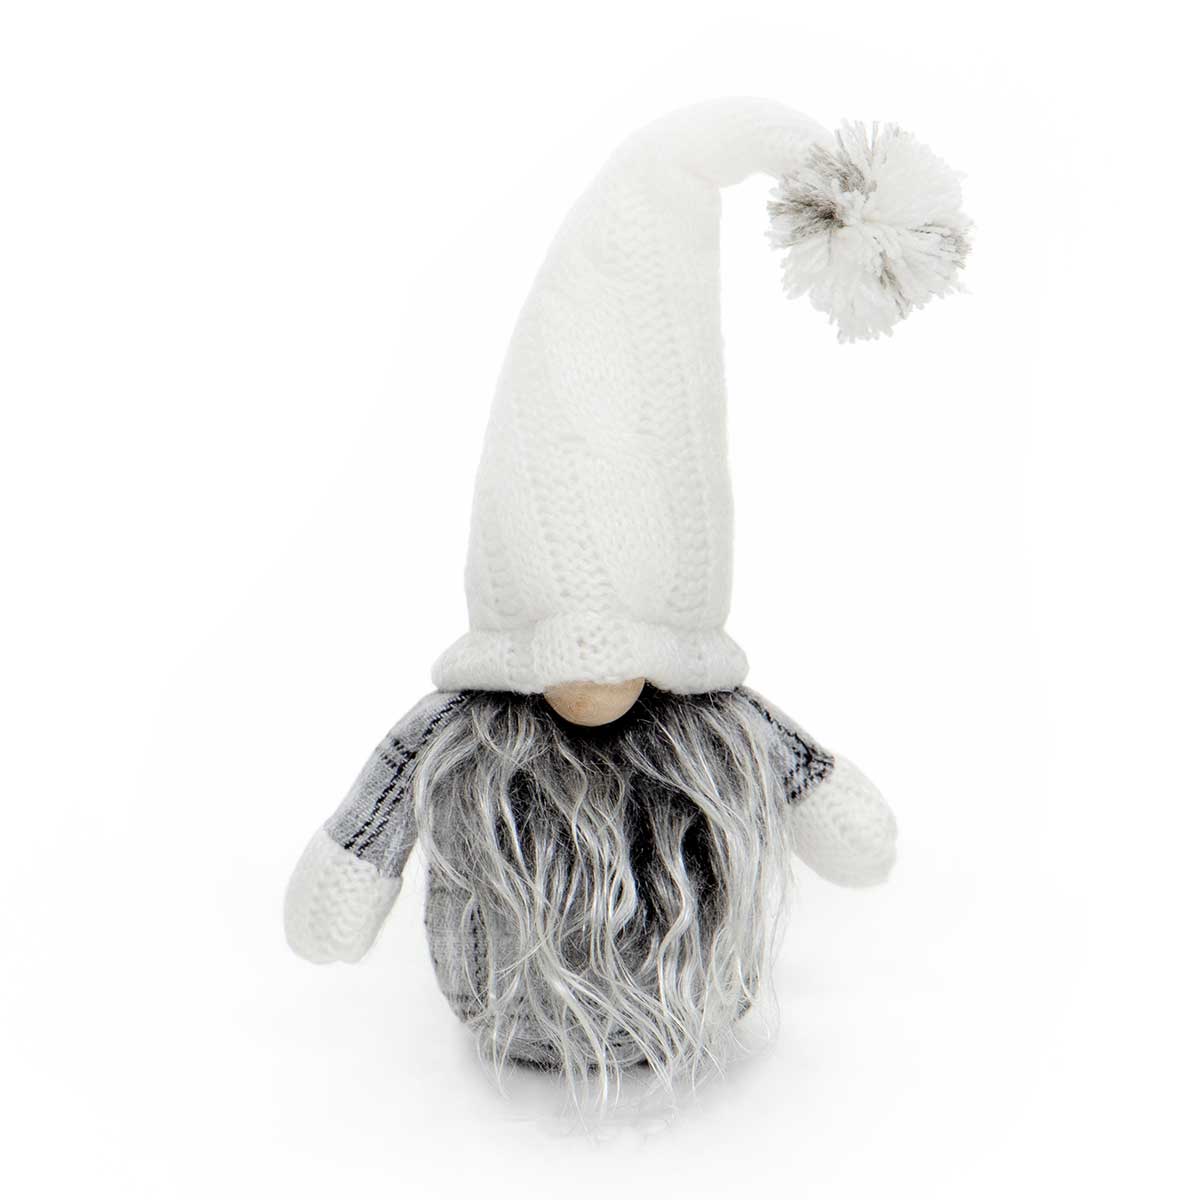 !POM-POM GNOME GREY/CREAM WITH WIRED CABLE KNIT SWEATER f33